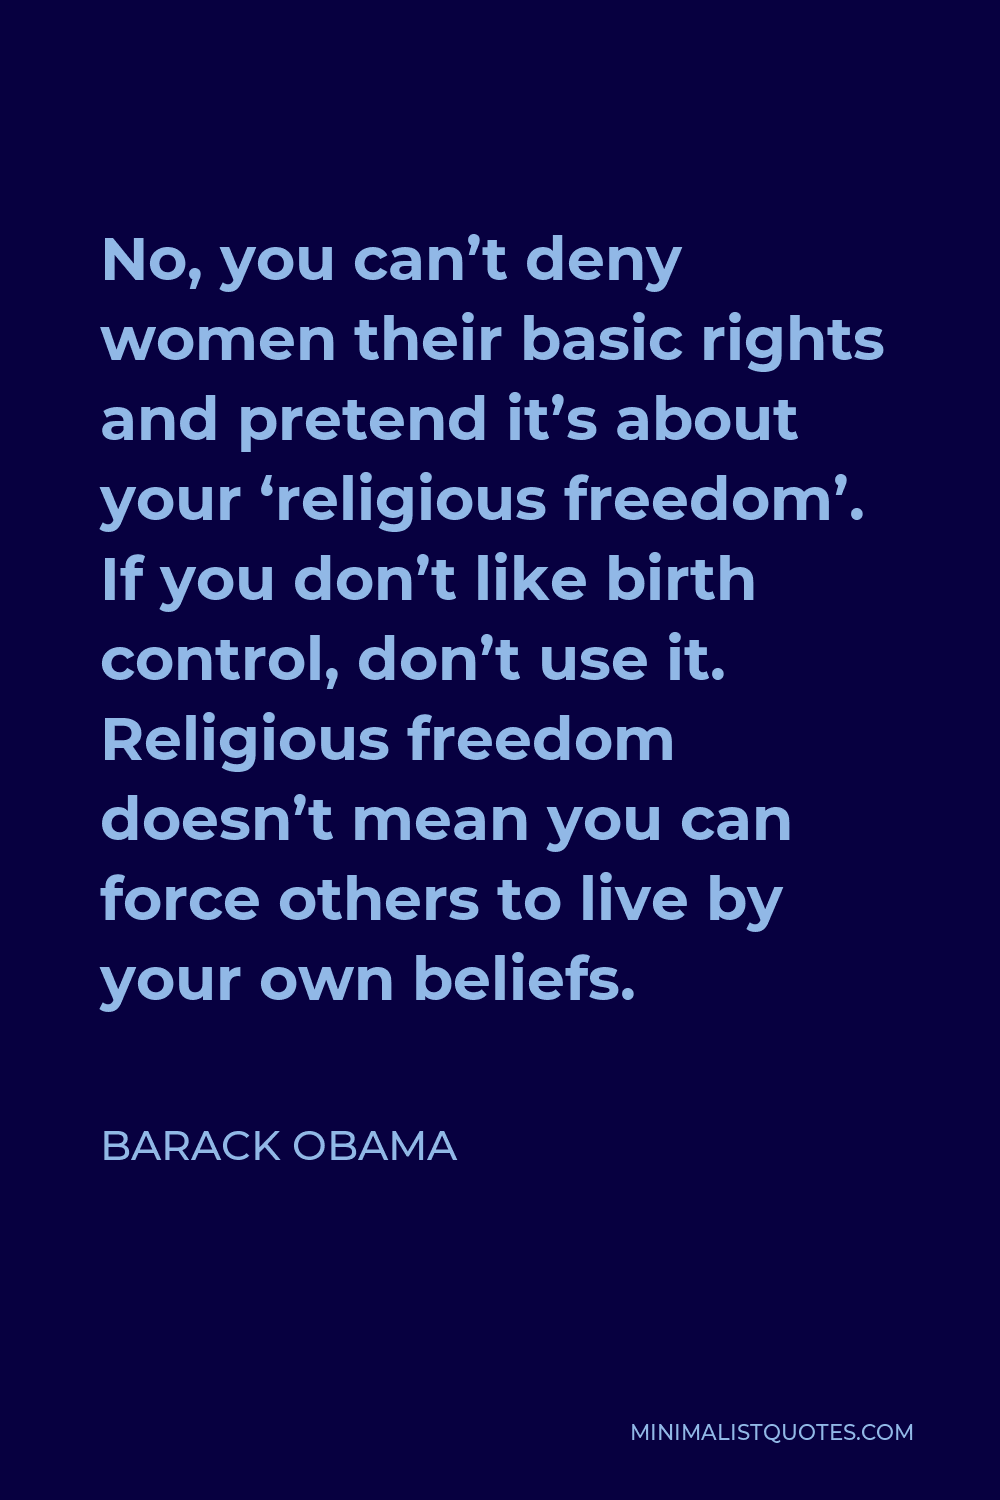 Barack Obama Quote - No, you can’t deny women their basic rights and pretend it’s about your ‘religious freedom’. If you don’t like birth control, don’t use it. Religious freedom doesn’t mean you can force others to live by your own beliefs.